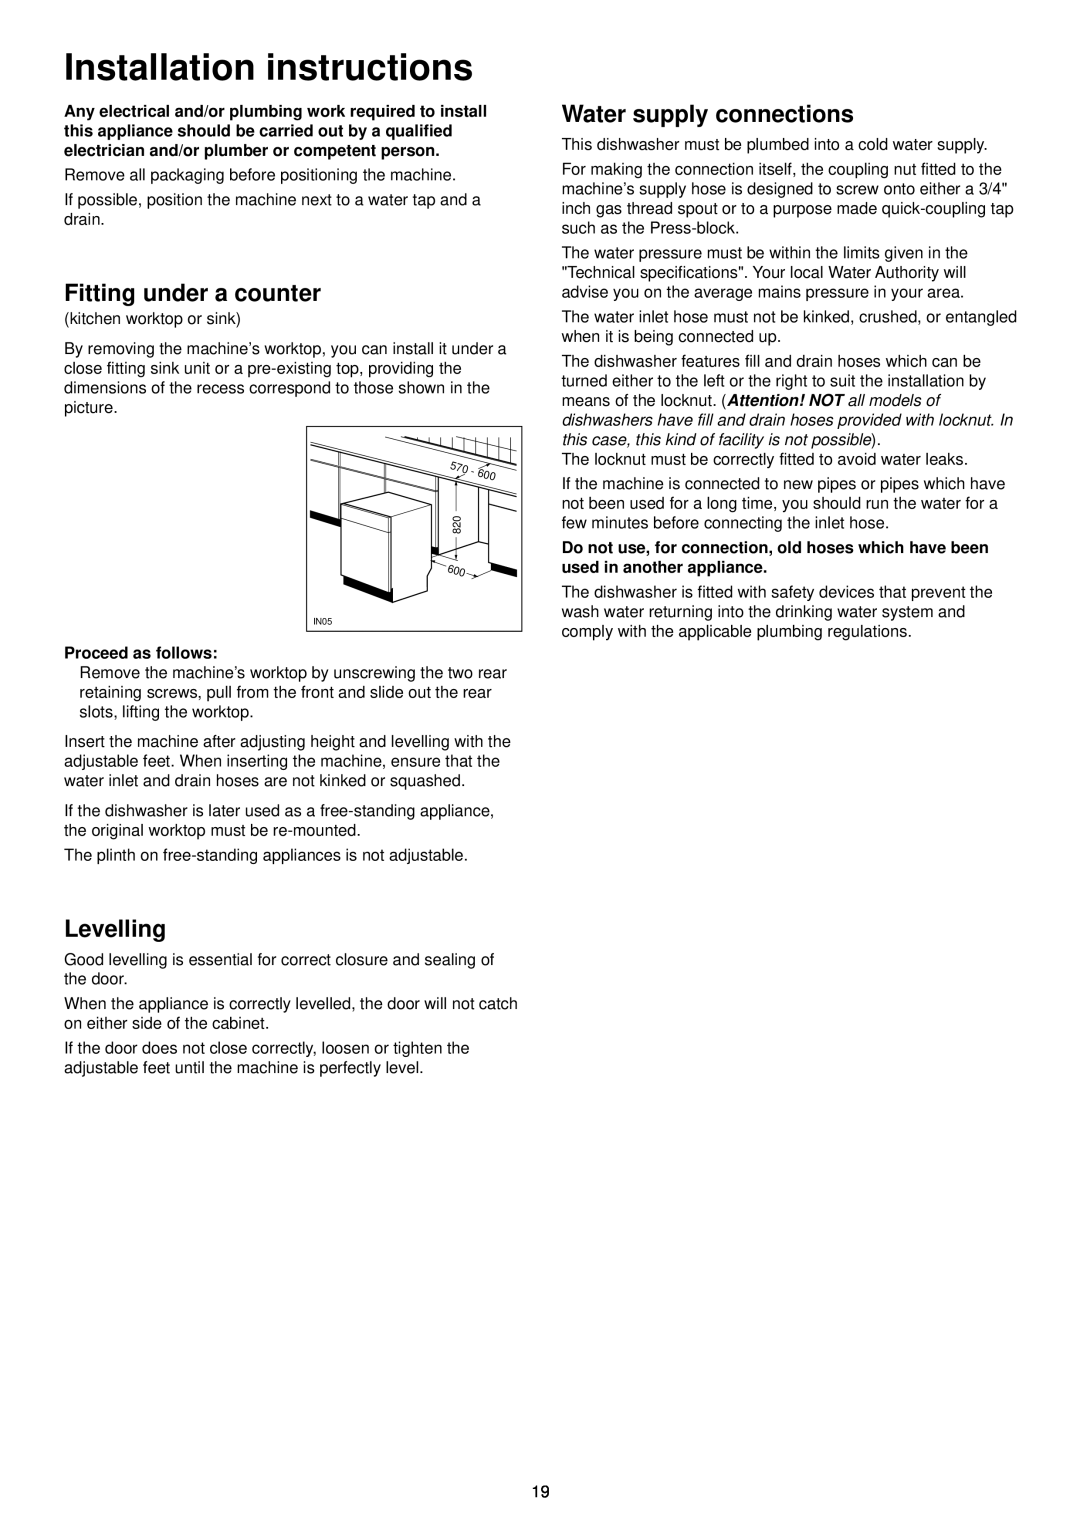 Zanussi DE 6855 manual Installation instructions, Fitting under a counter, Levelling, Water supply connections 